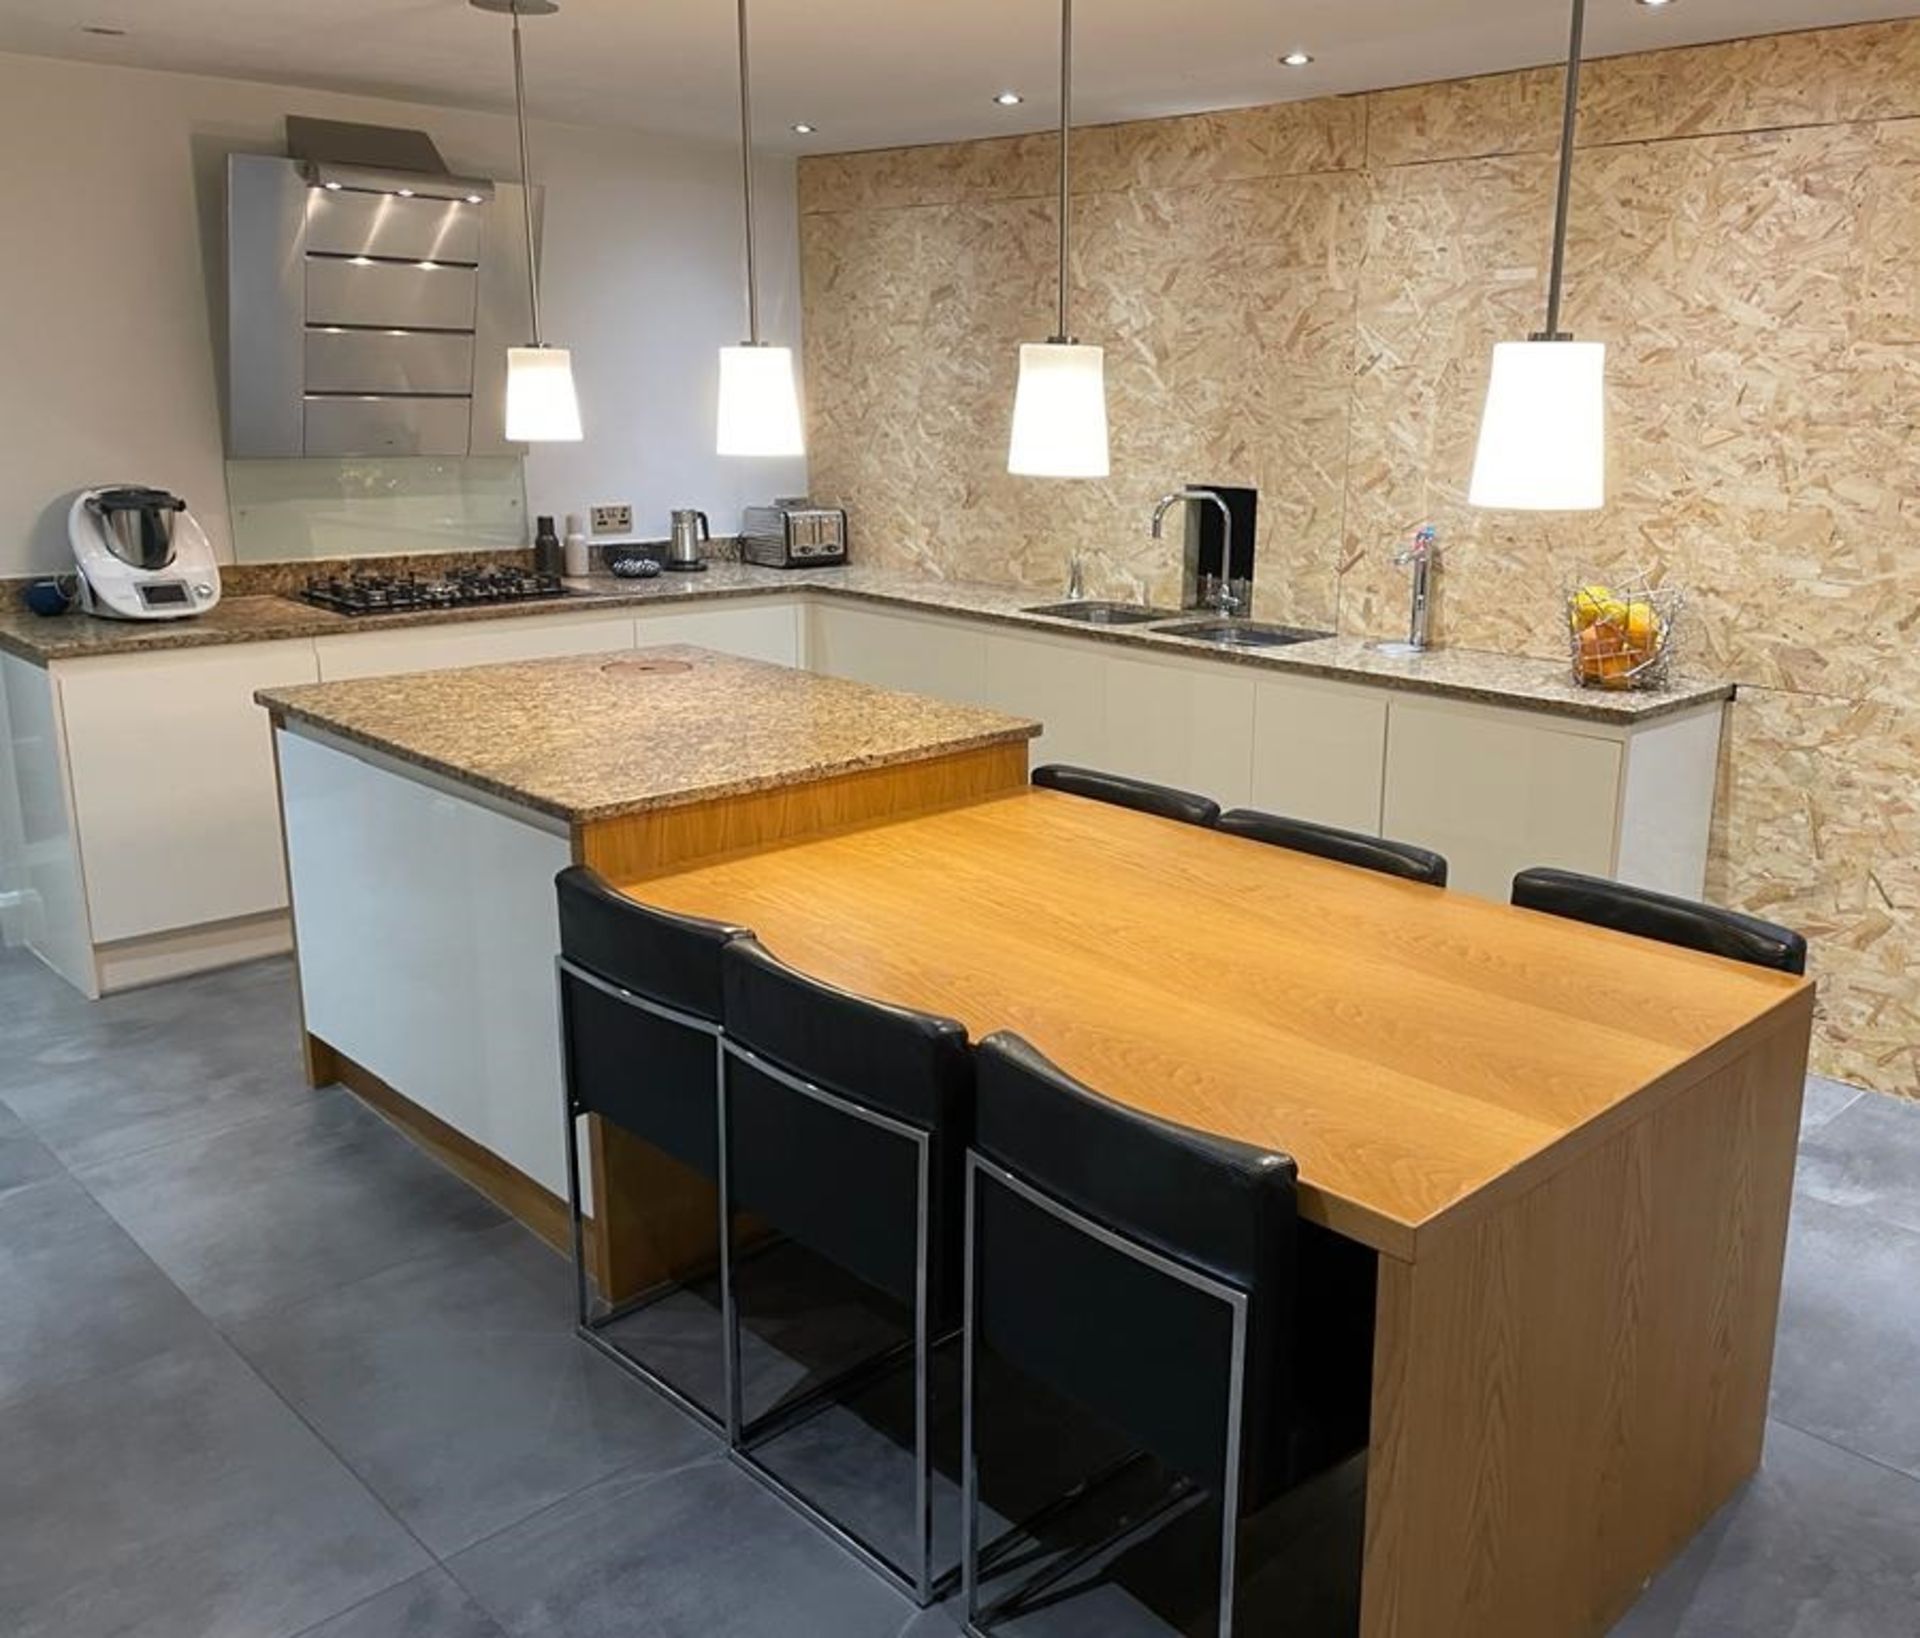 1 x Stunning PARAPAN Handleless Fitted Kitchen with Neff Appliances, Granite Worktops & Island - Image 3 of 126